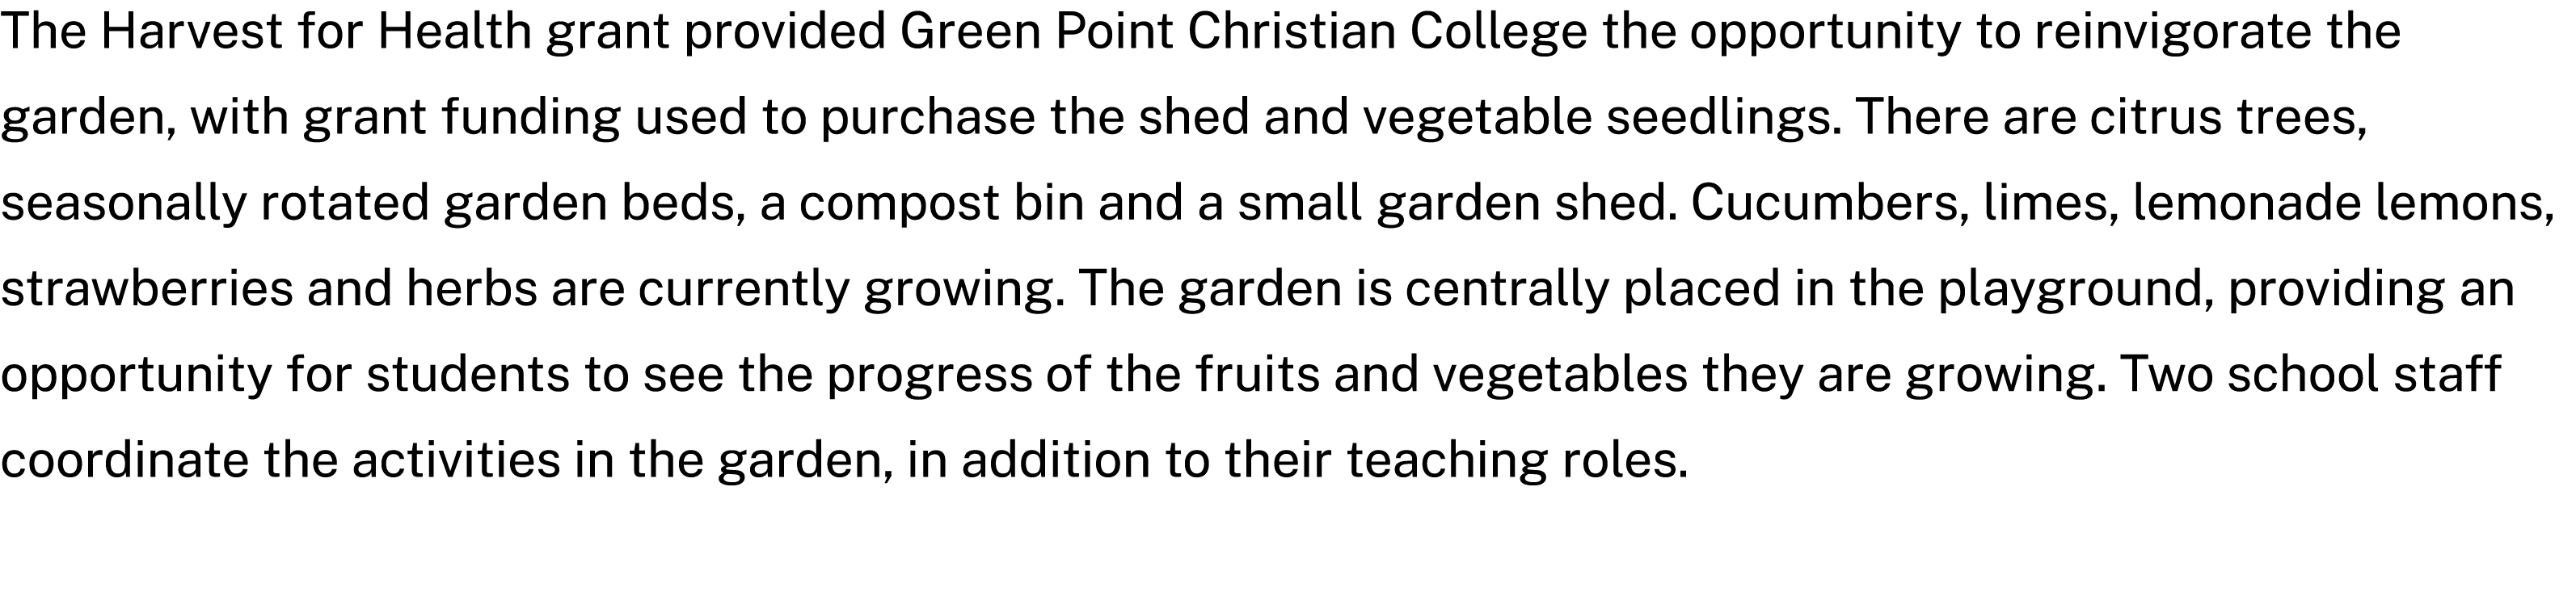 The Harvest for Health grant provided Green Point Christian College the opportunity to reinvigorate the garden, with ...